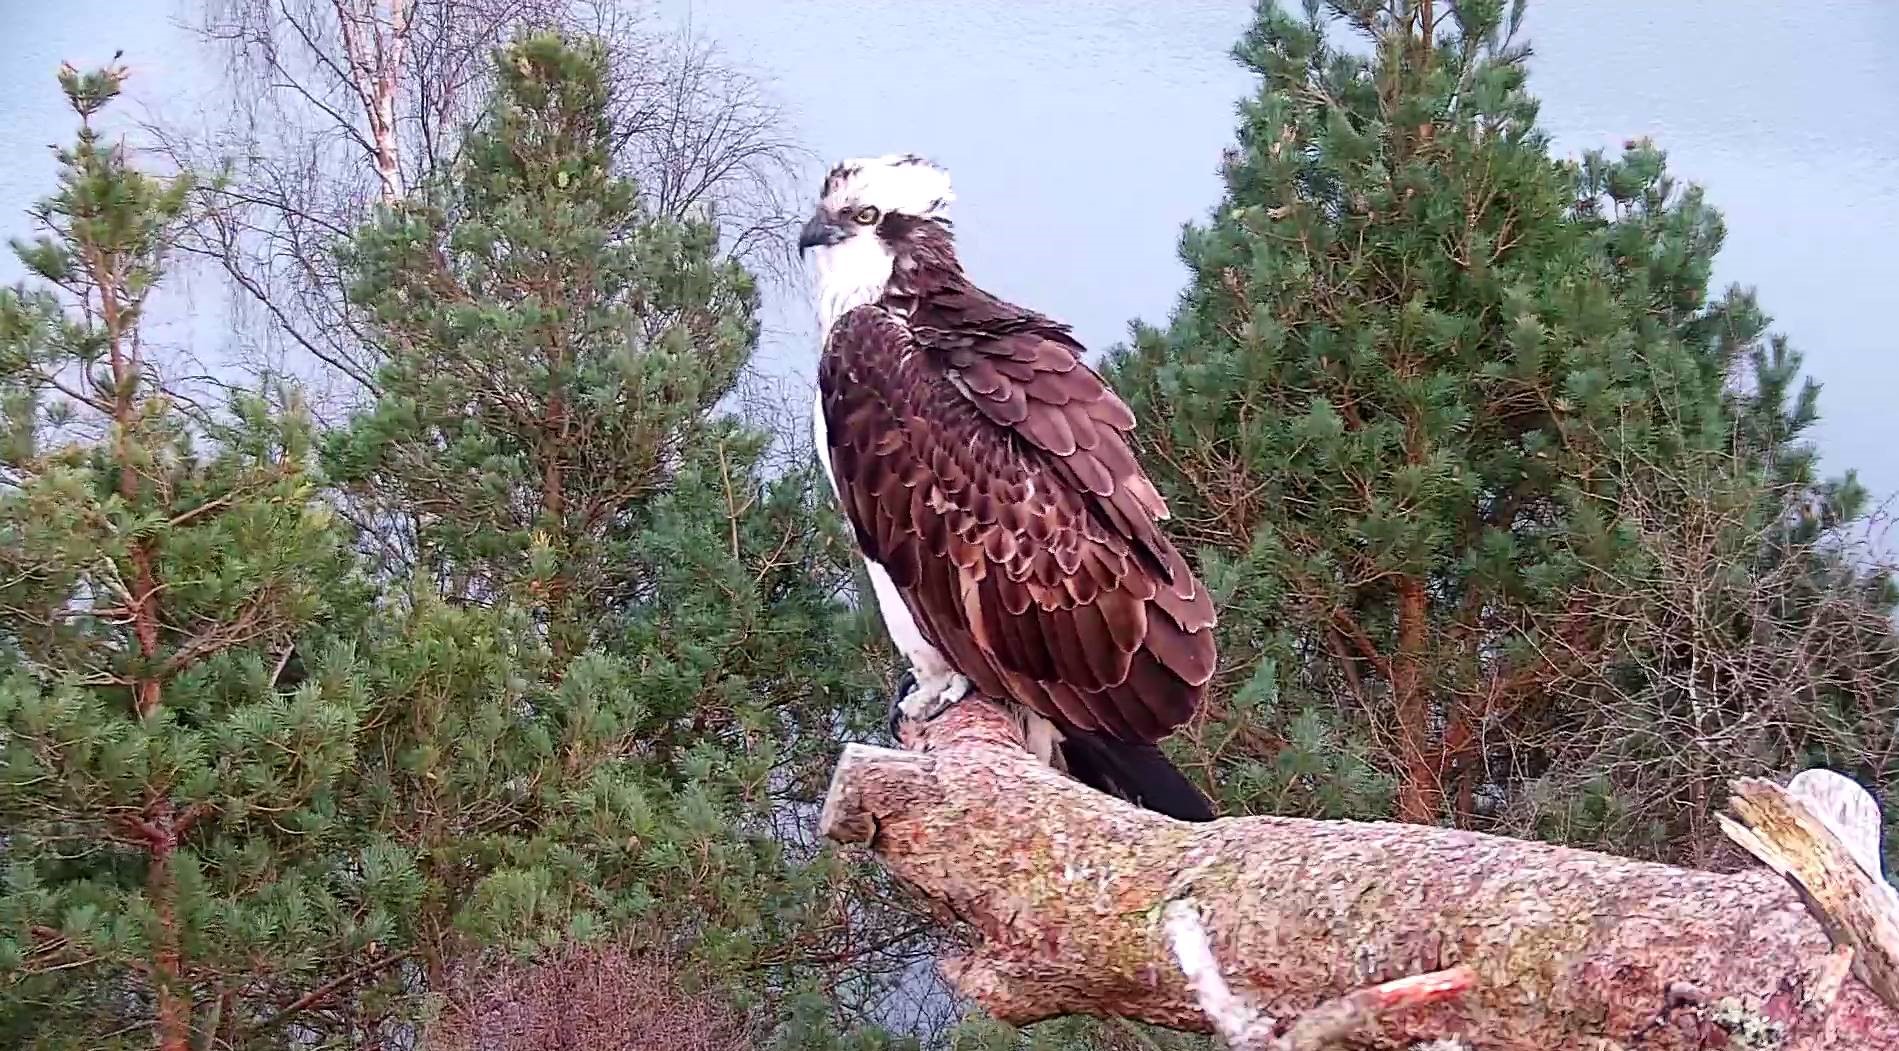 Osprey Diary at Loch of the Lowes – Weeks 1 & 2